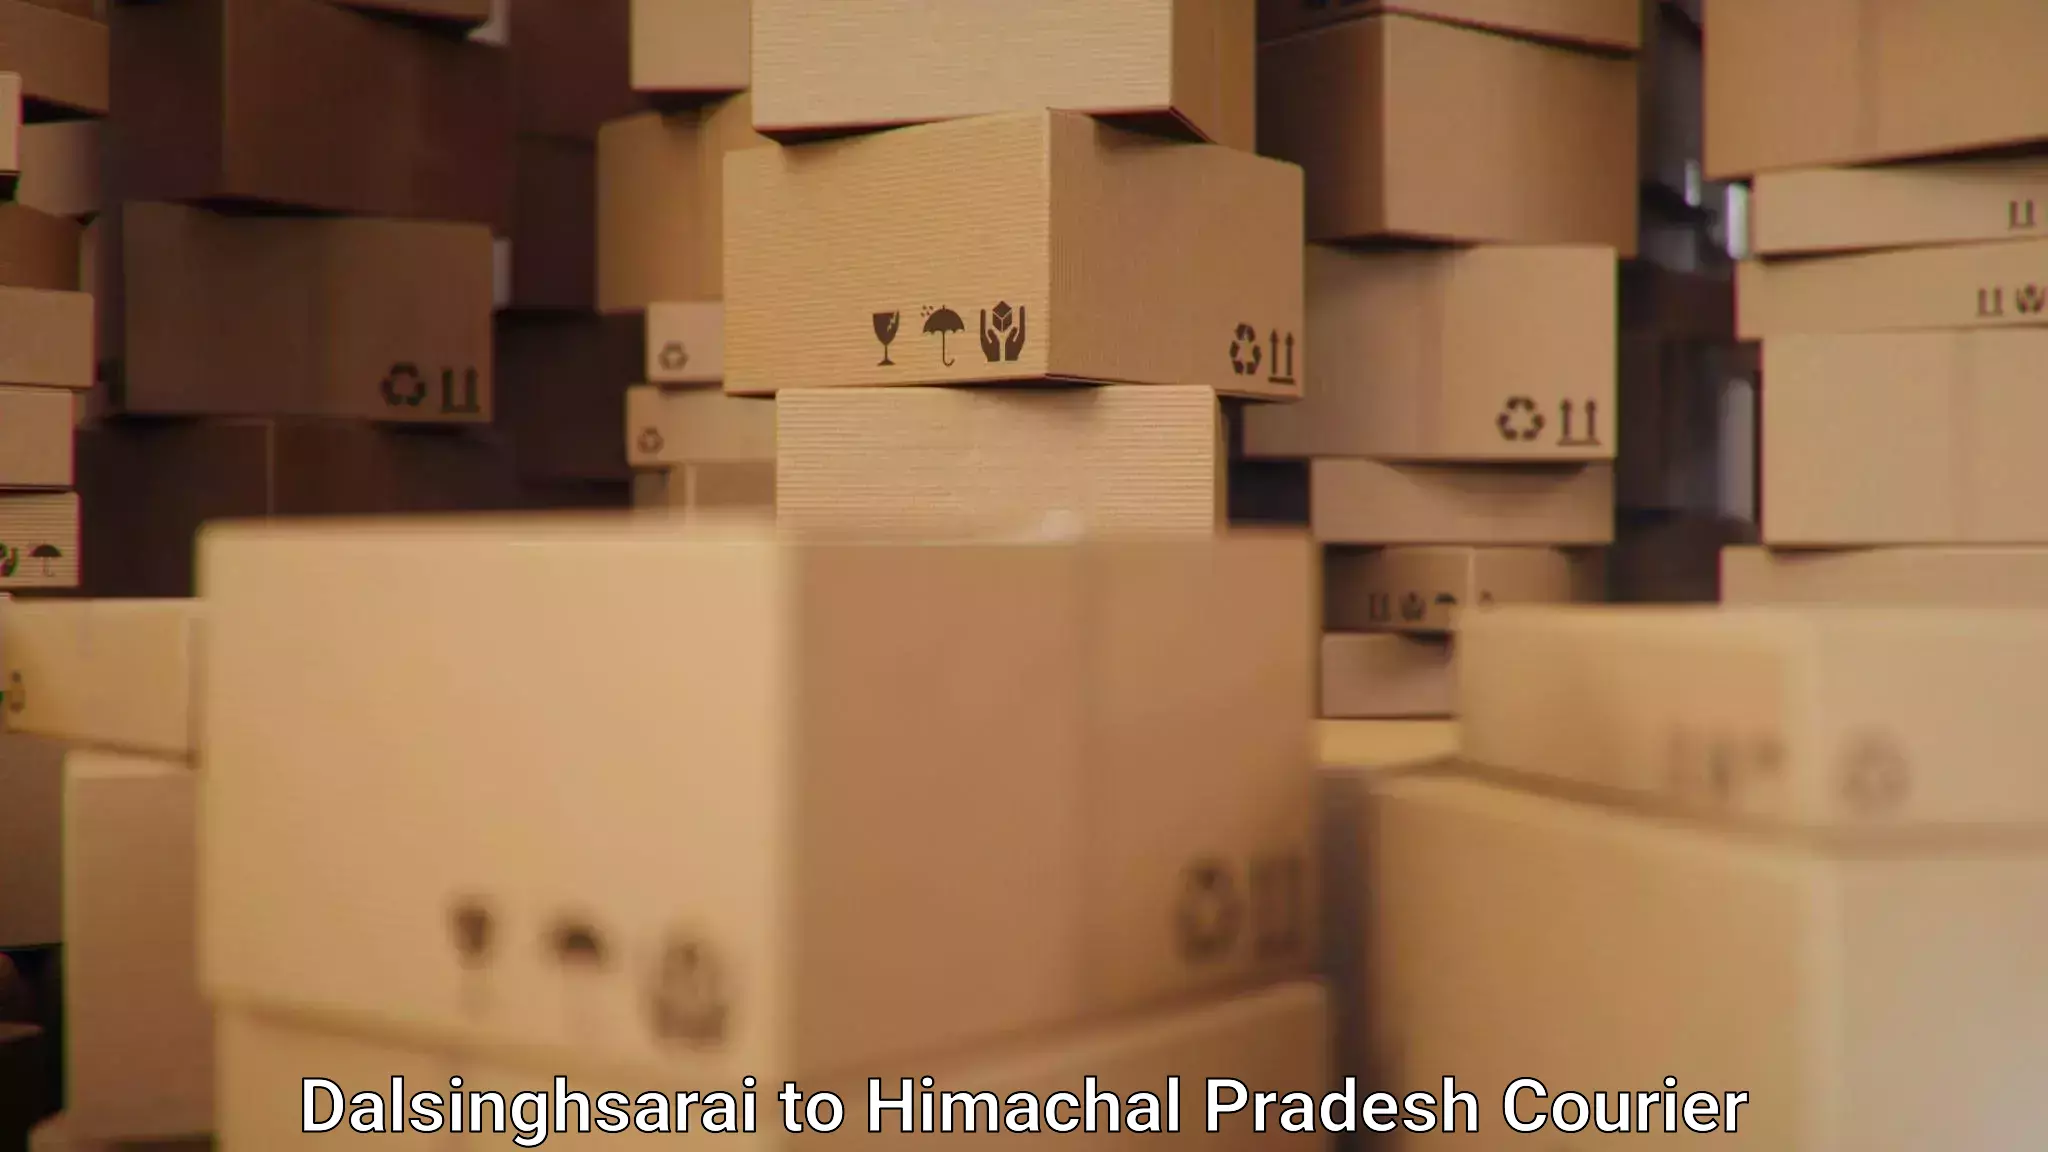 Supply chain delivery Dalsinghsarai to Himachal Pradesh